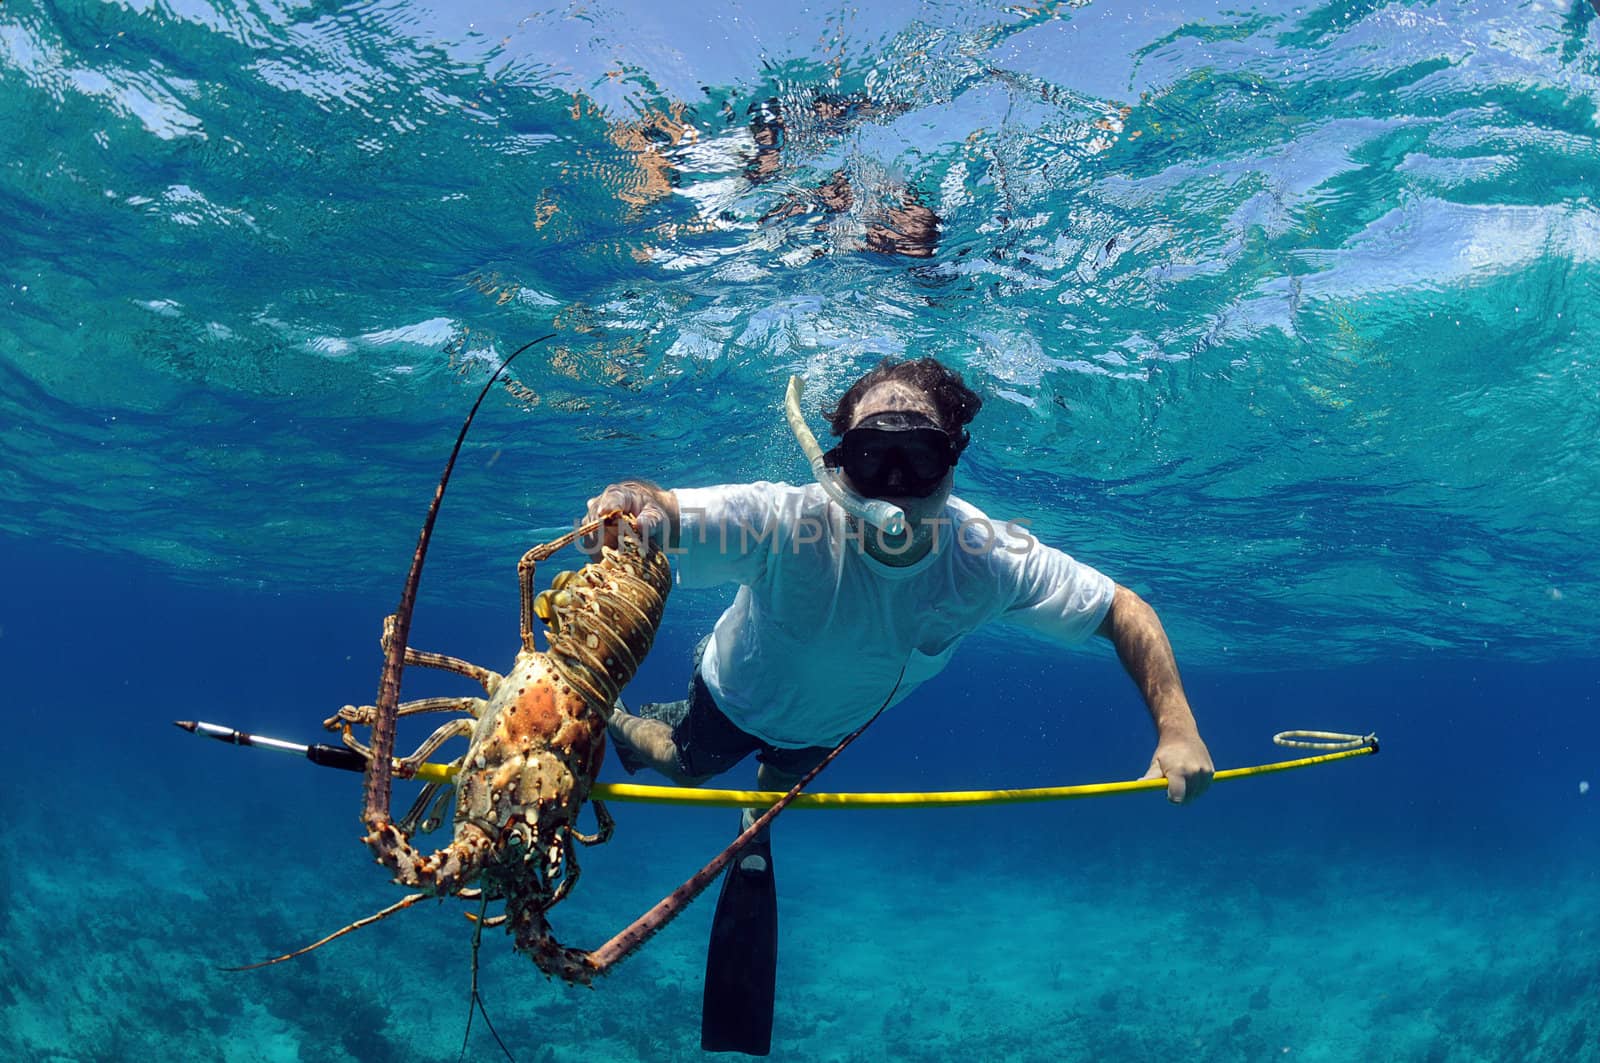 Underwater image of man catching lobster on a speargun while free diving in ocean